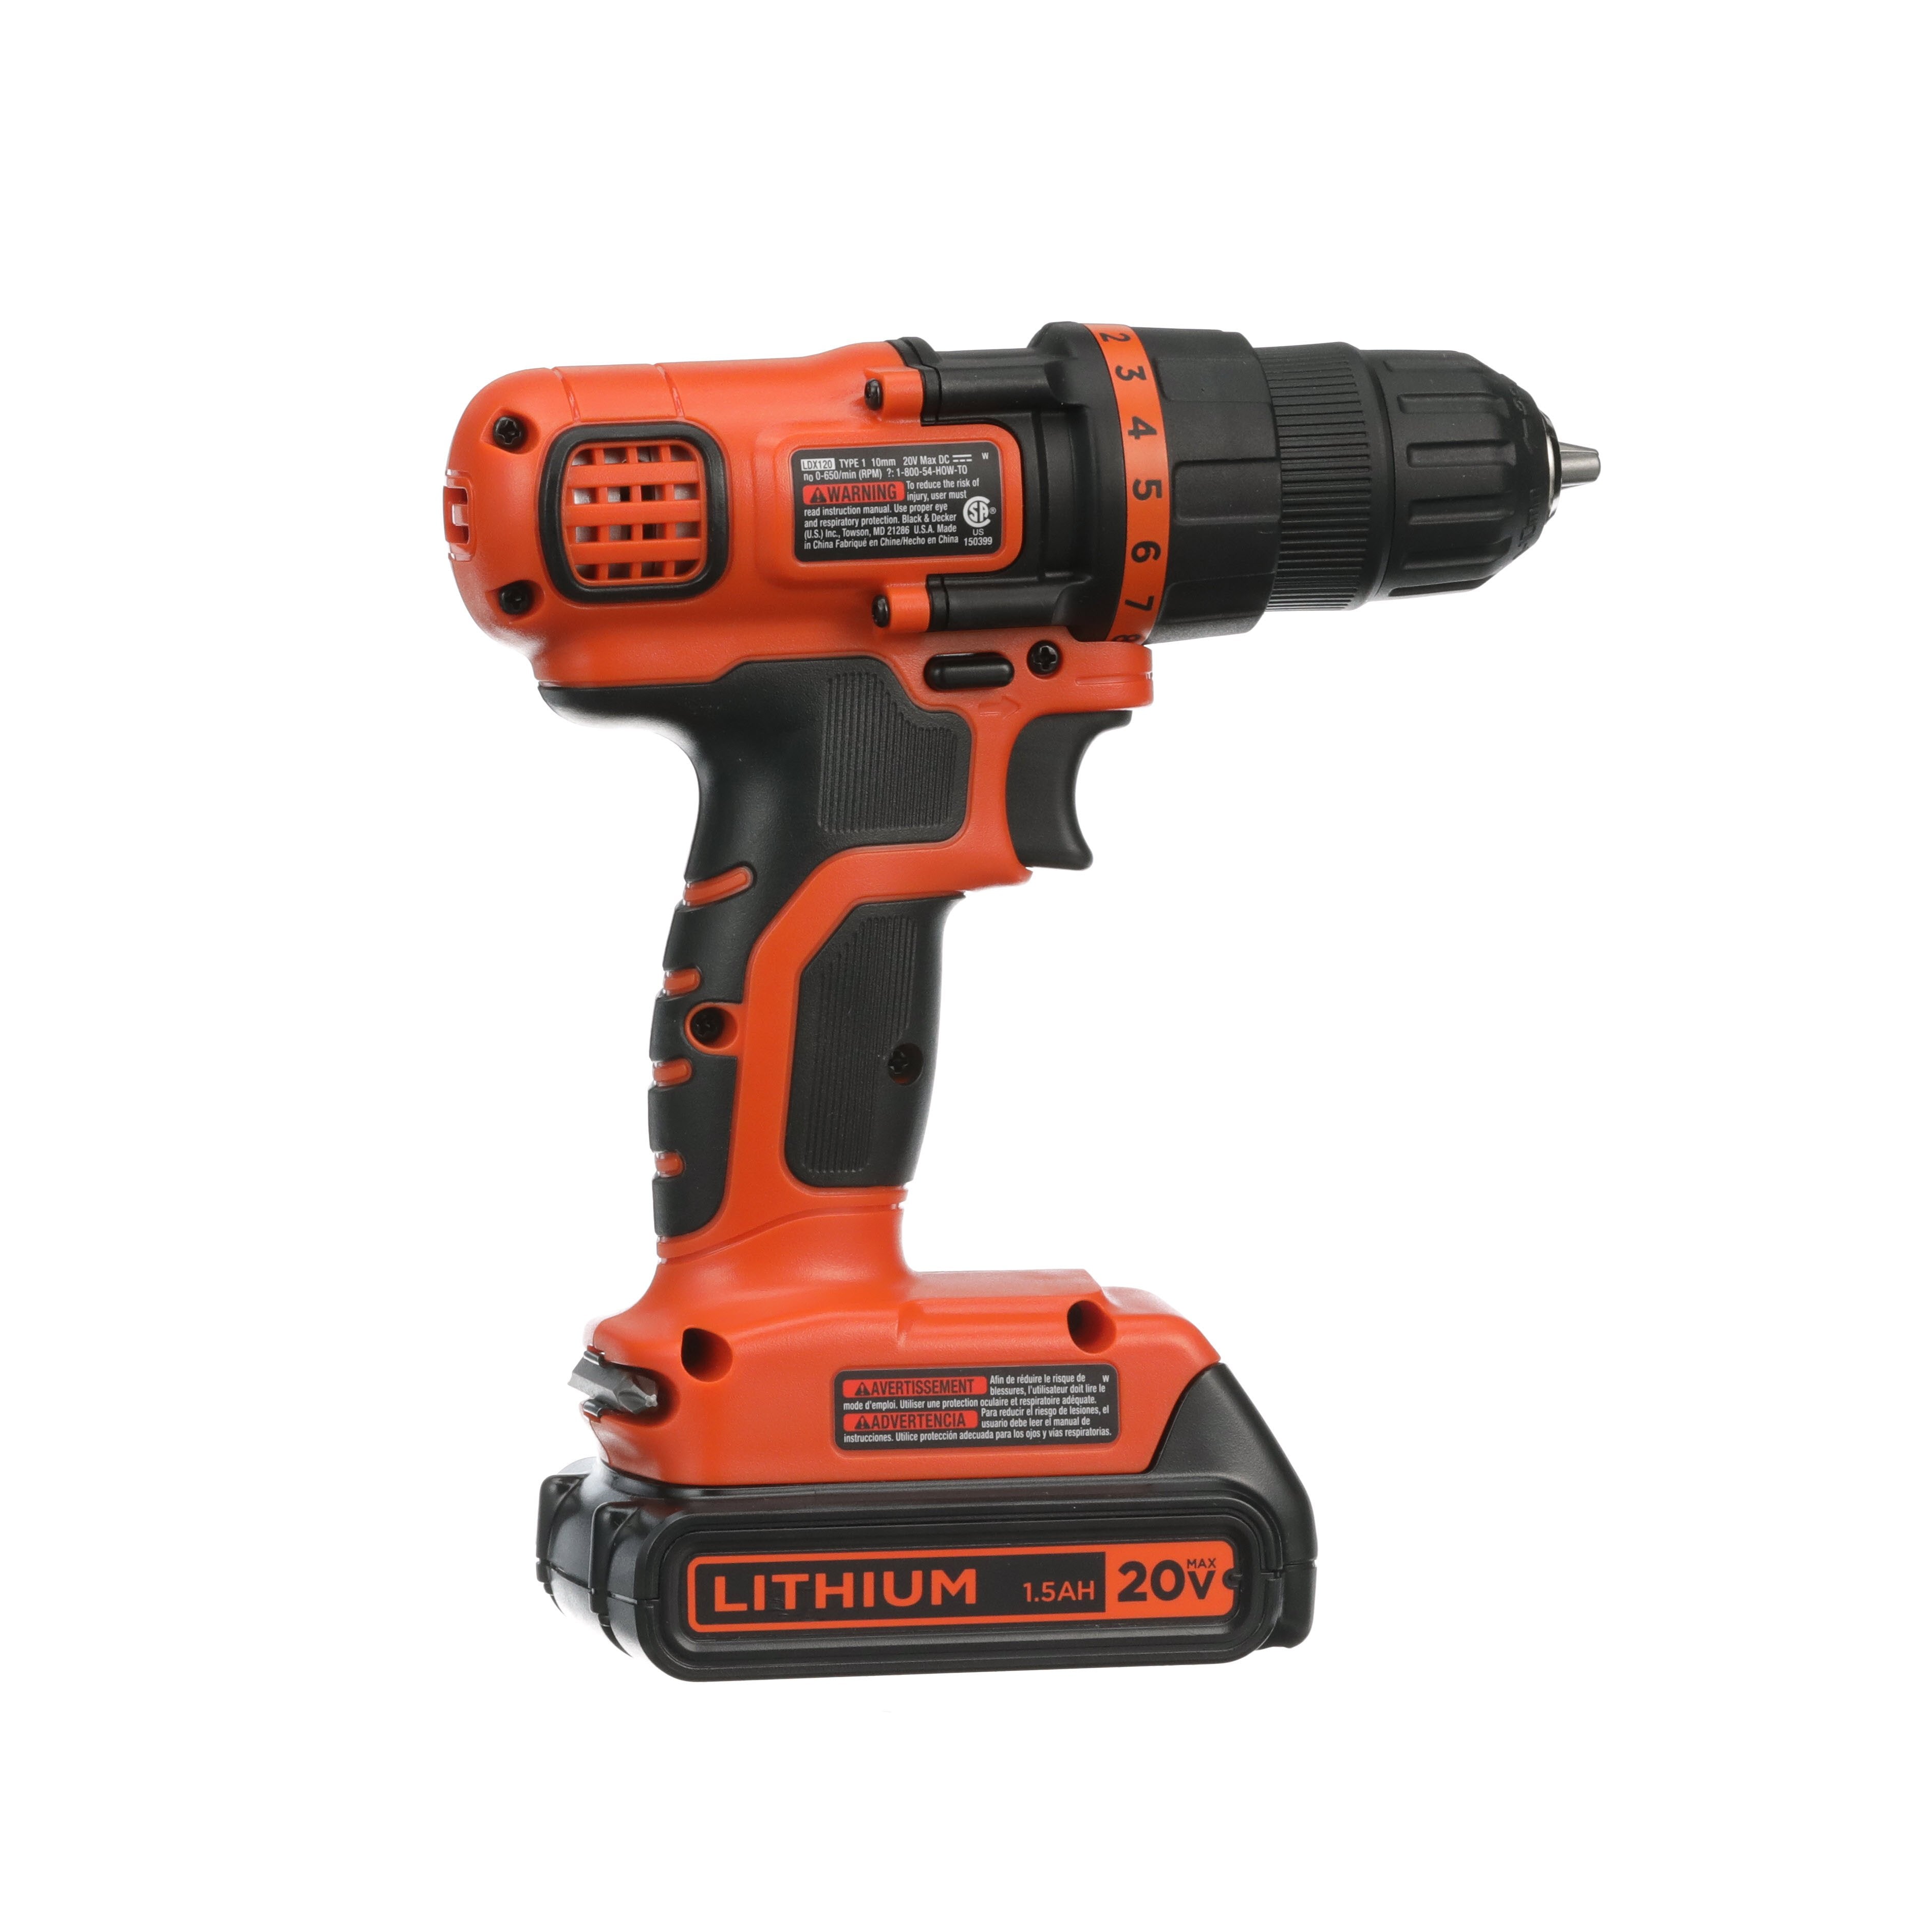 BLACK+DECKER LBXR20 20-Volt MAX Extended Run Time Lithium-Ion Cordless To  with BLACK+DECKER LDX120C 20V MAX Lithium Ion Drill / Driver